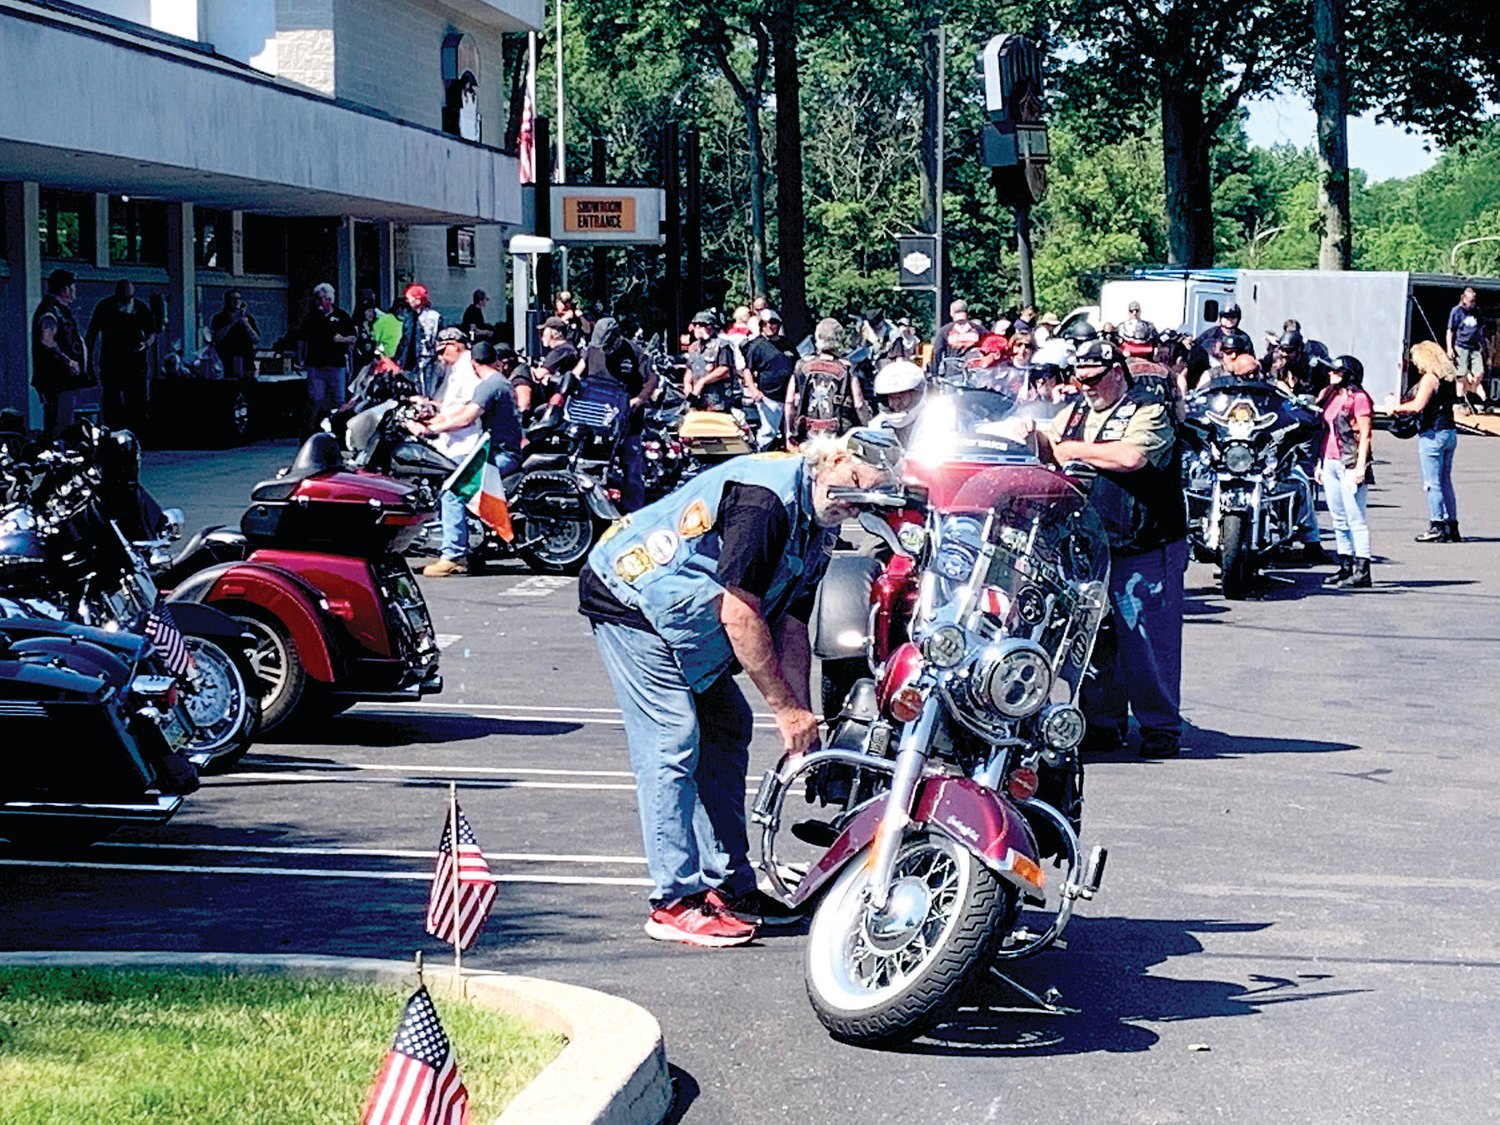 Bikers gather together at the Stars & Stripes Harley-Davidson in Langhorne before the ride.